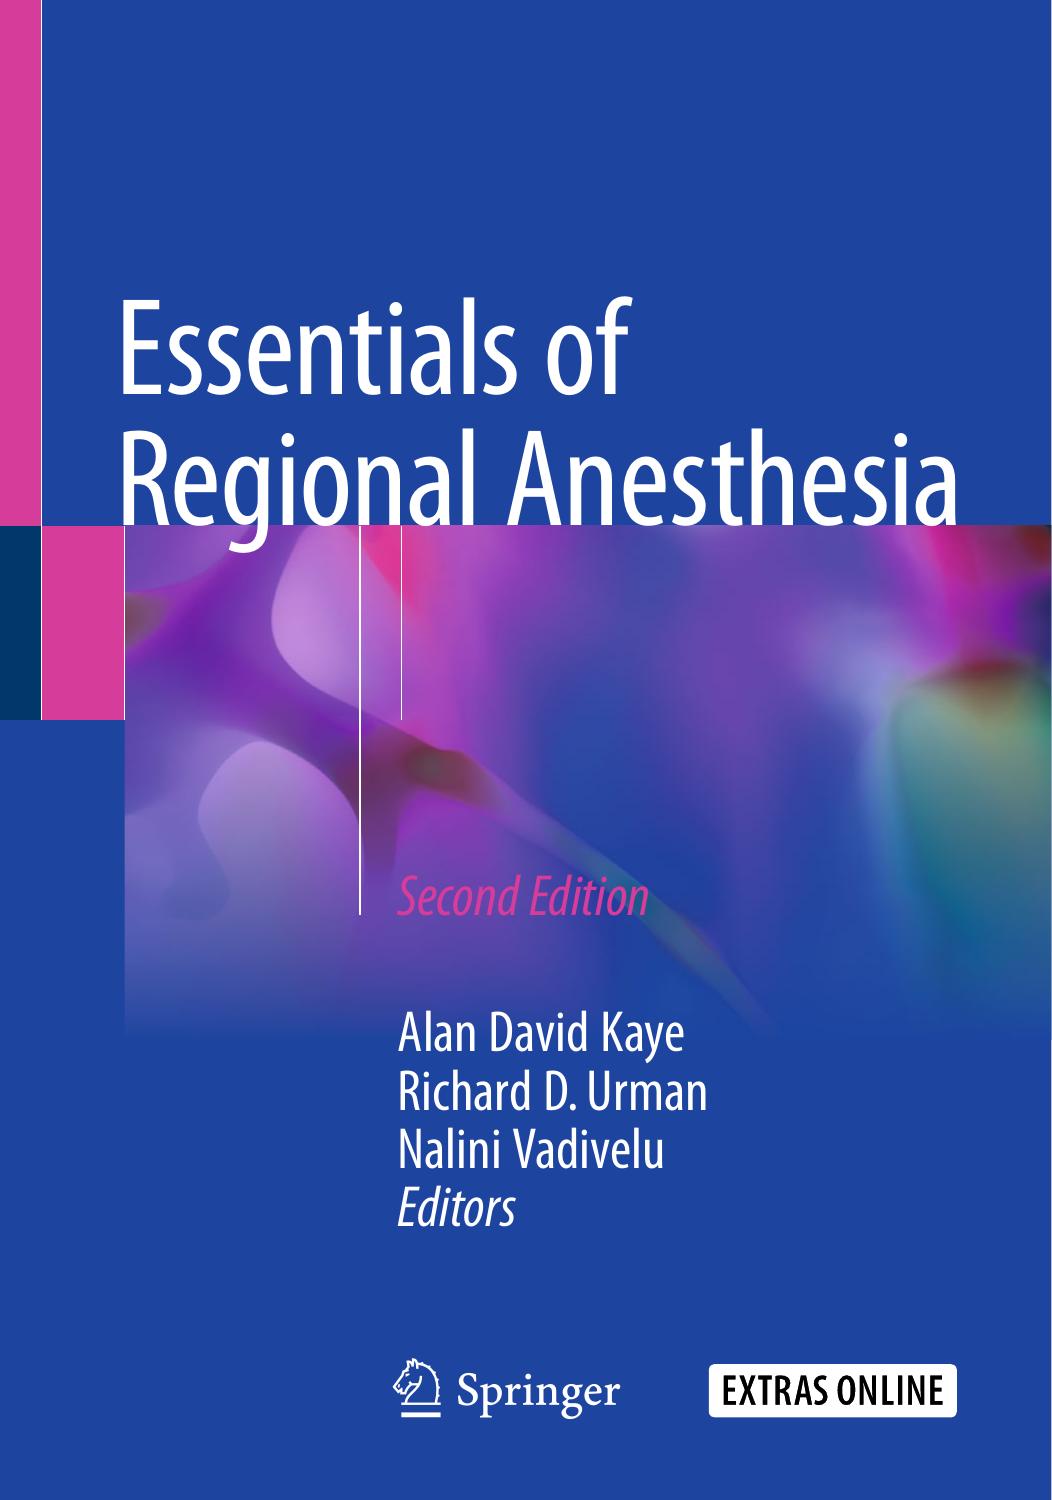 Essentials of Regional Anesthesia 2nd ed 2018